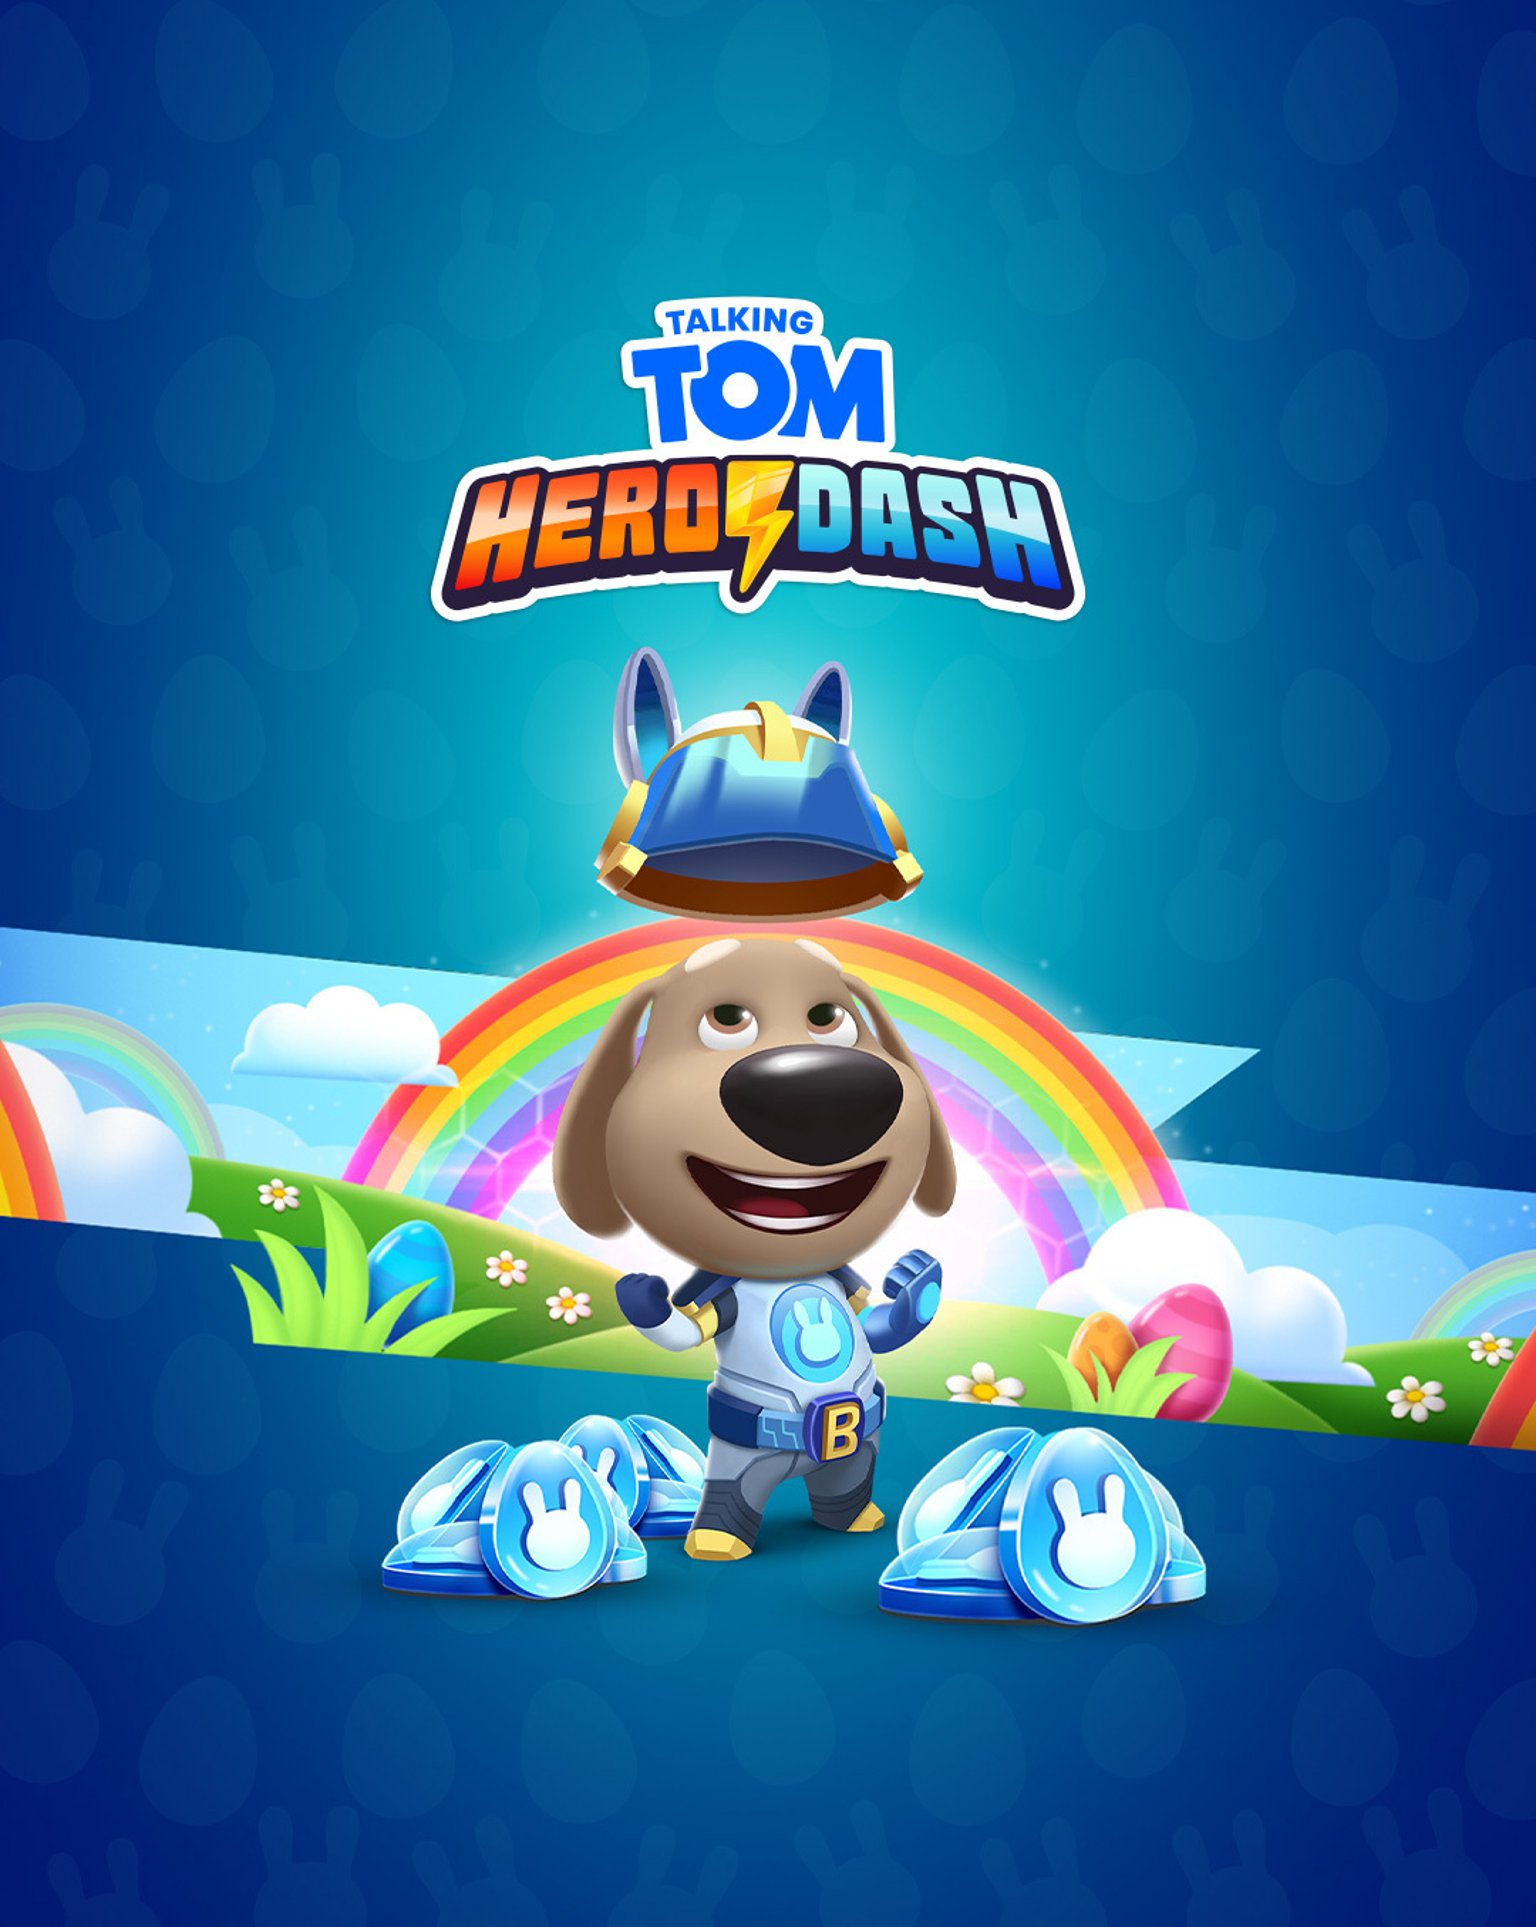 Easter Comes to Talking Tom Hero Dash